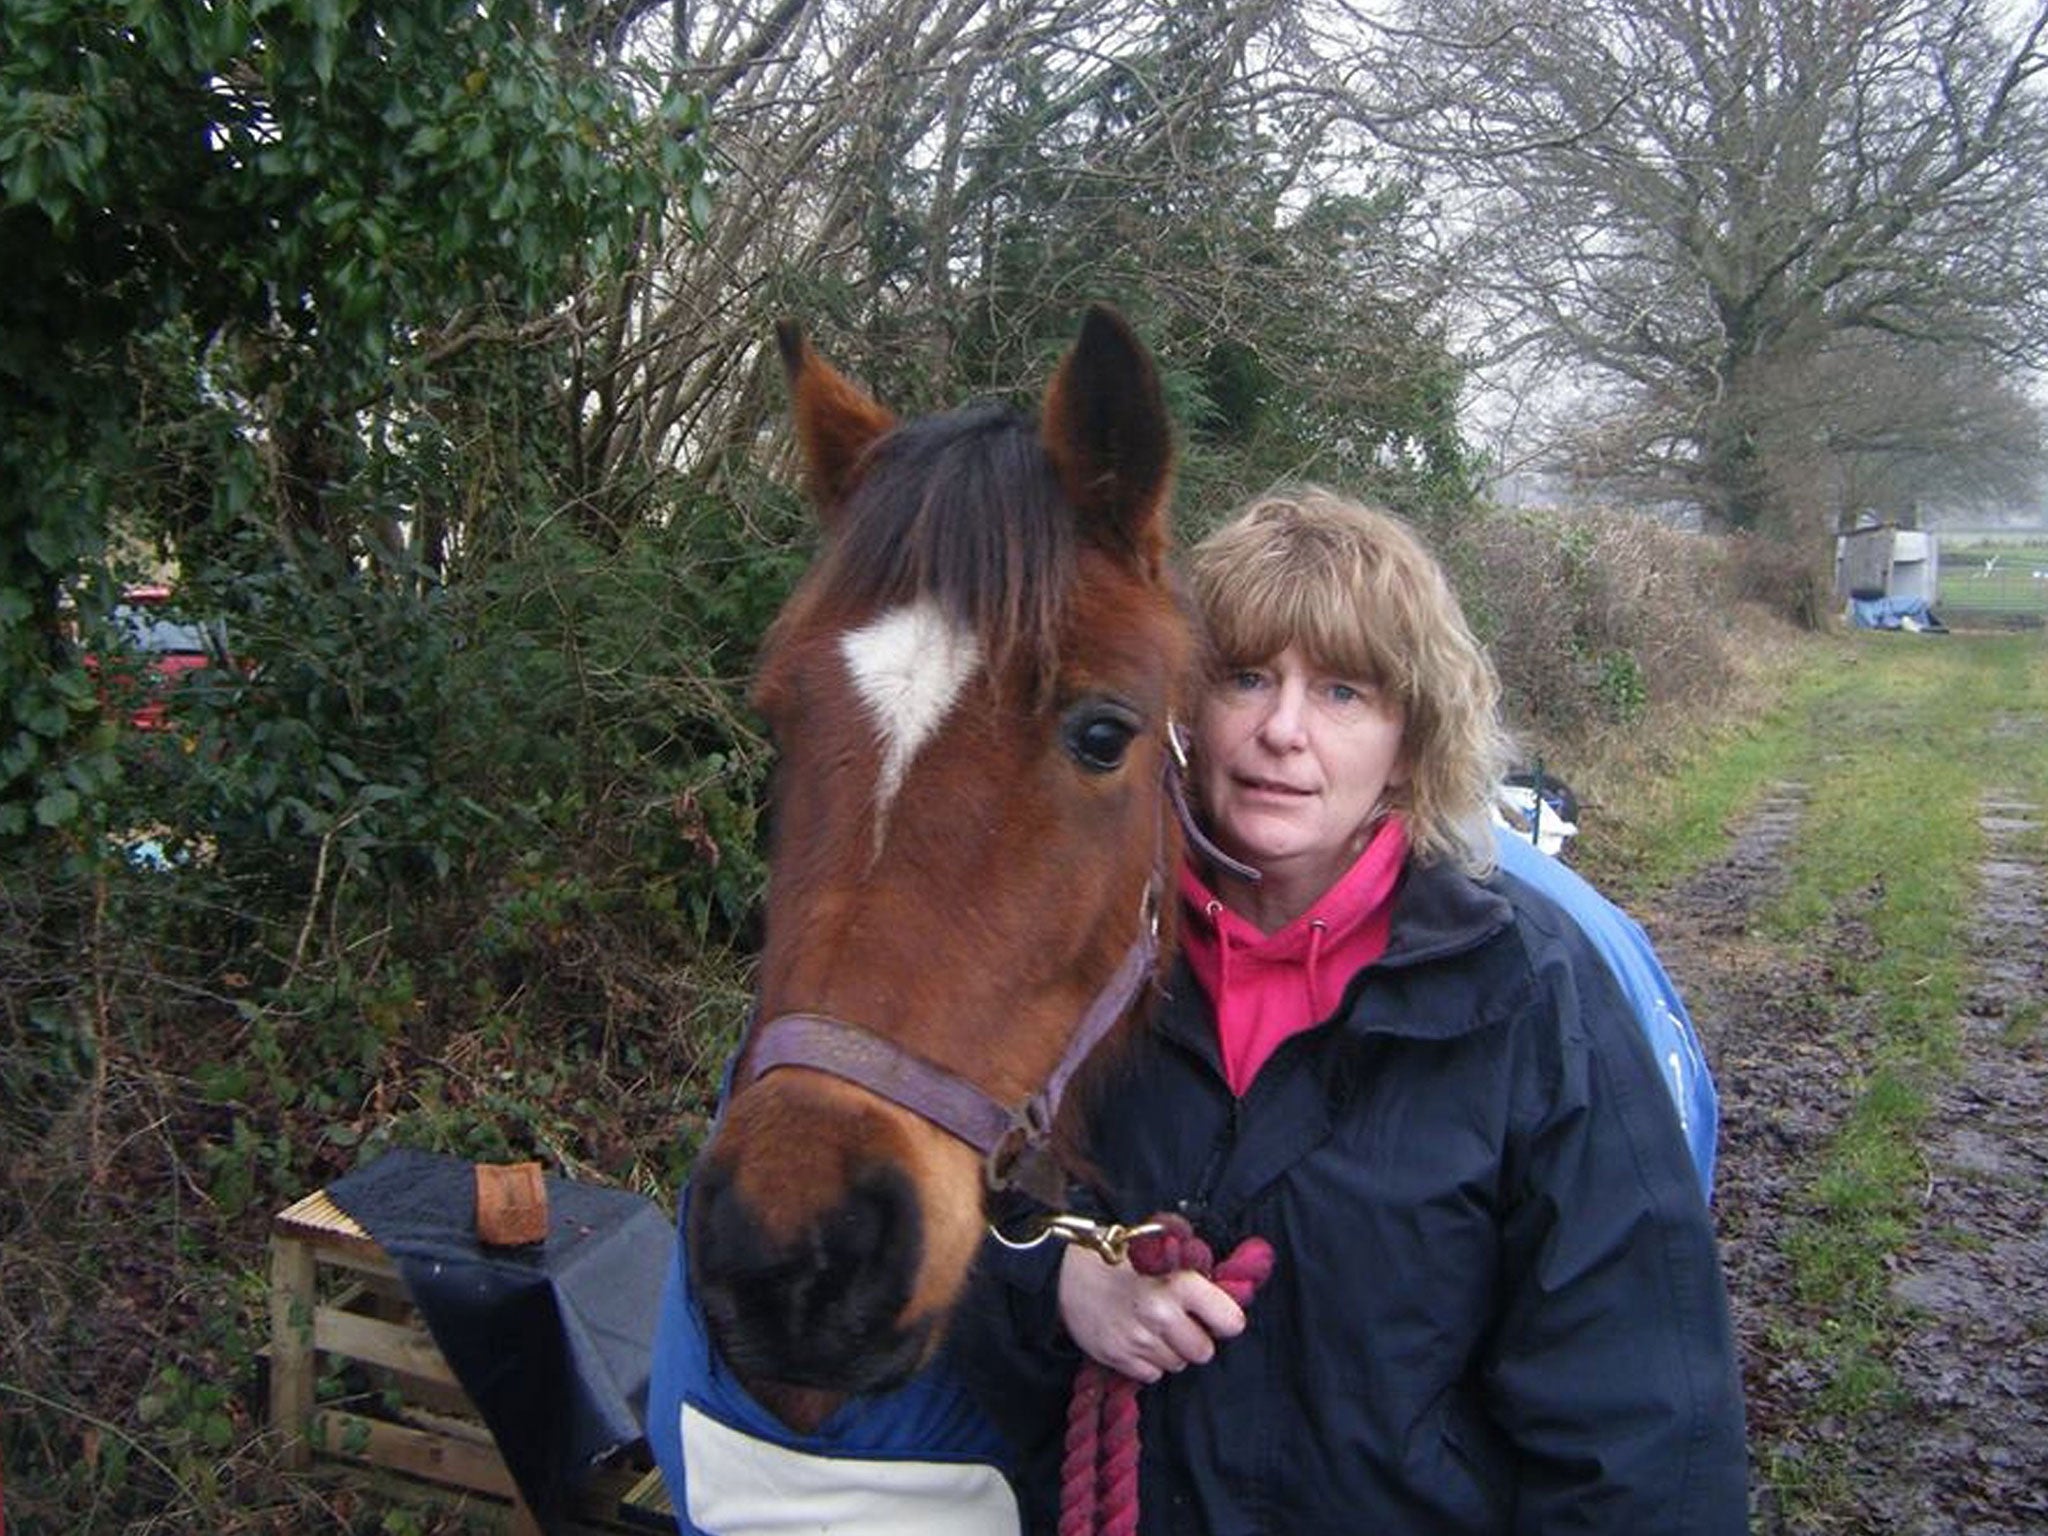 Detectives from Hampshire Constabulary say they believe Penelope Anne Davis, 47, was tending her horse shortly before she was killed